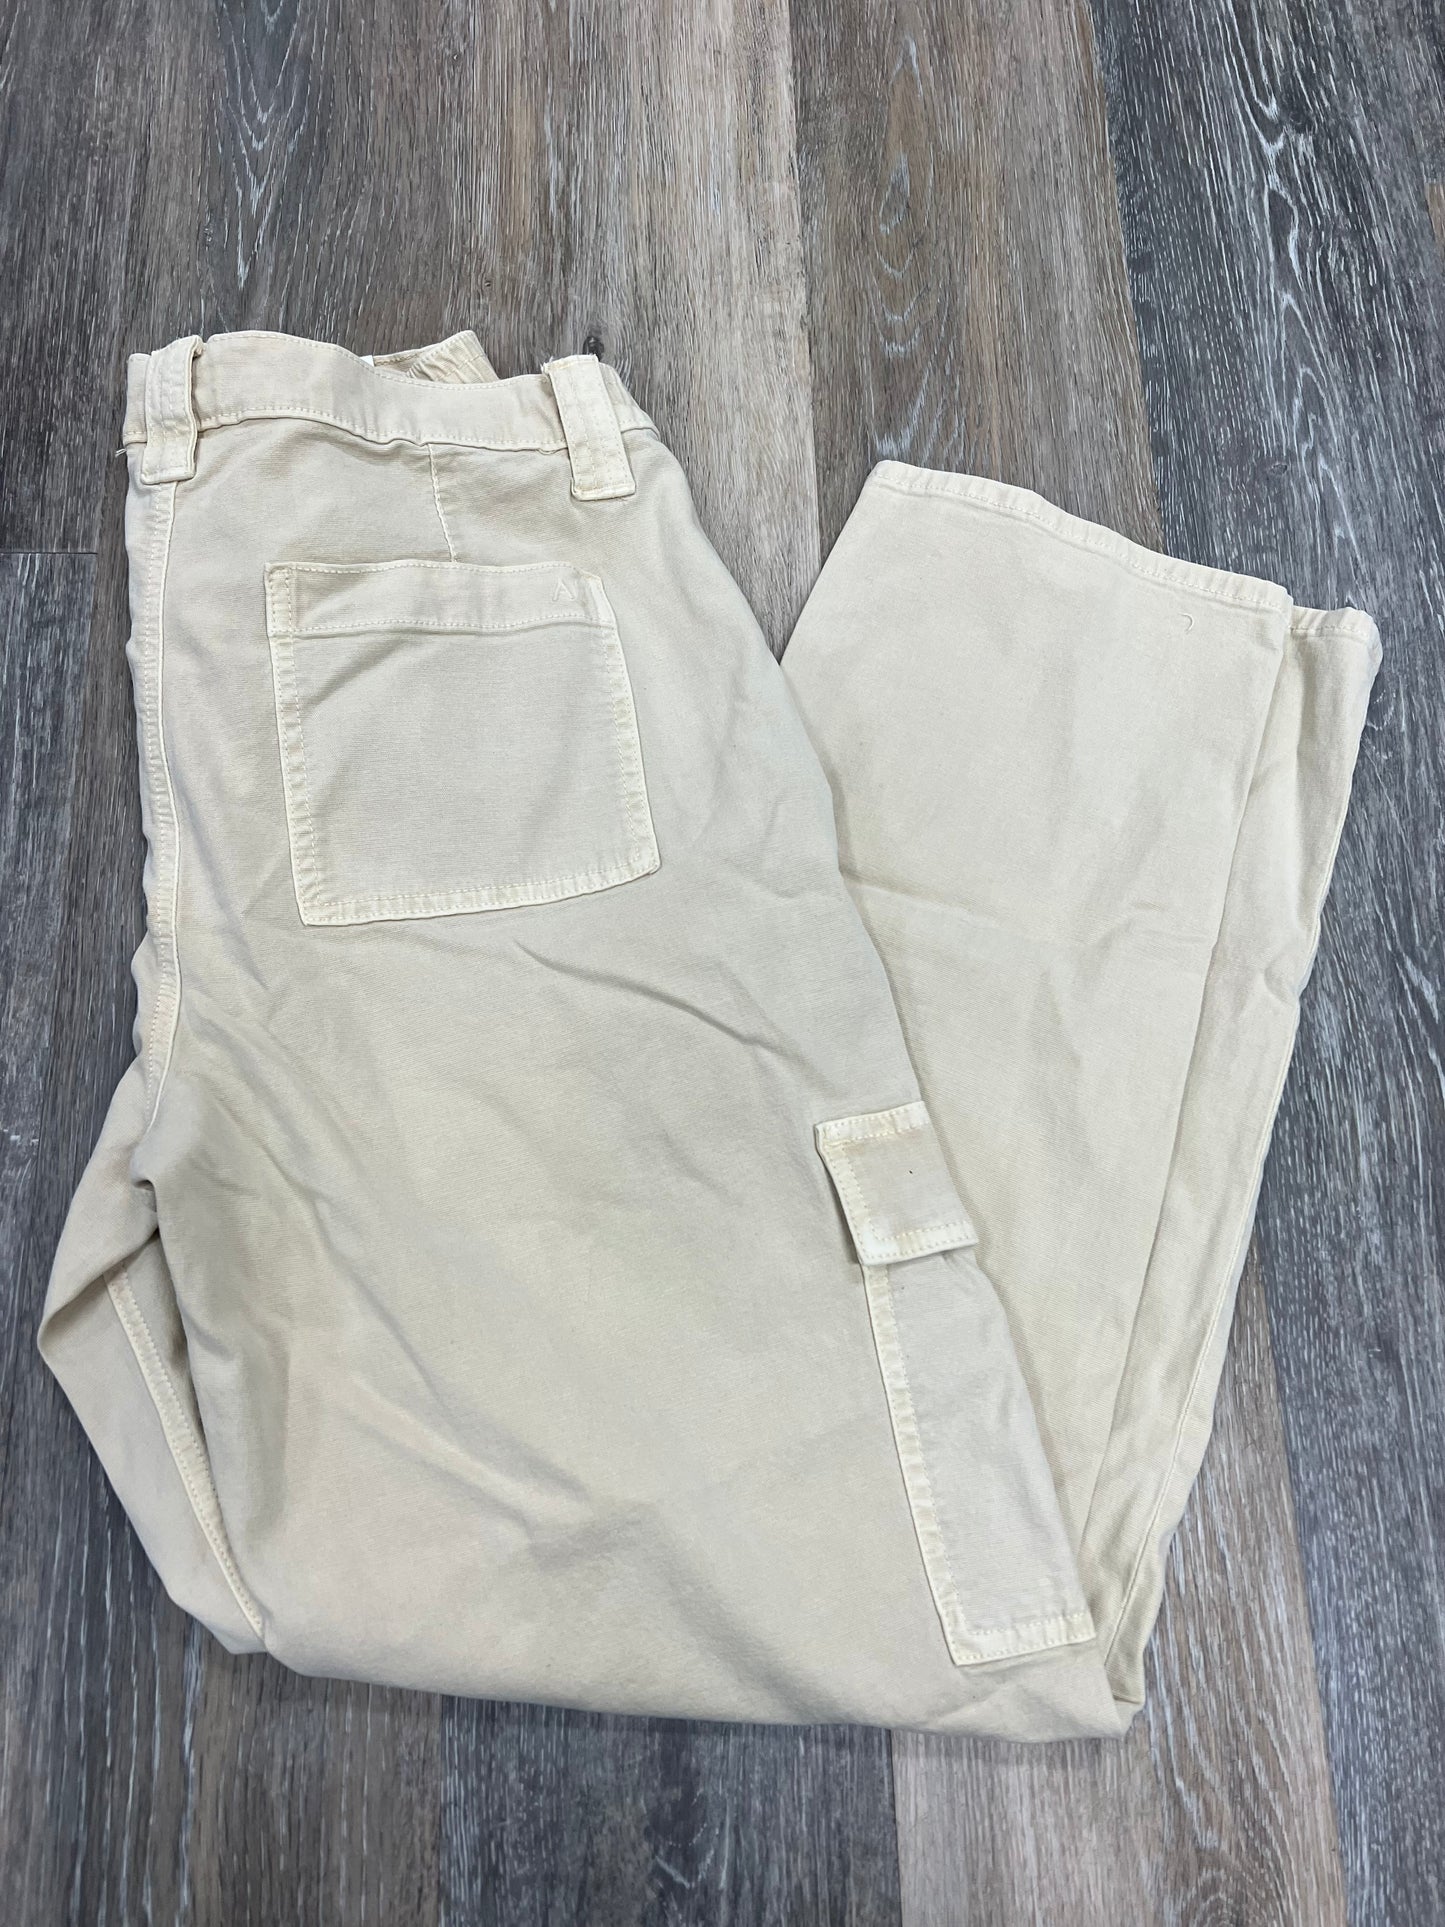 Pants Cargo & Utility By American Eagle  Size: 10